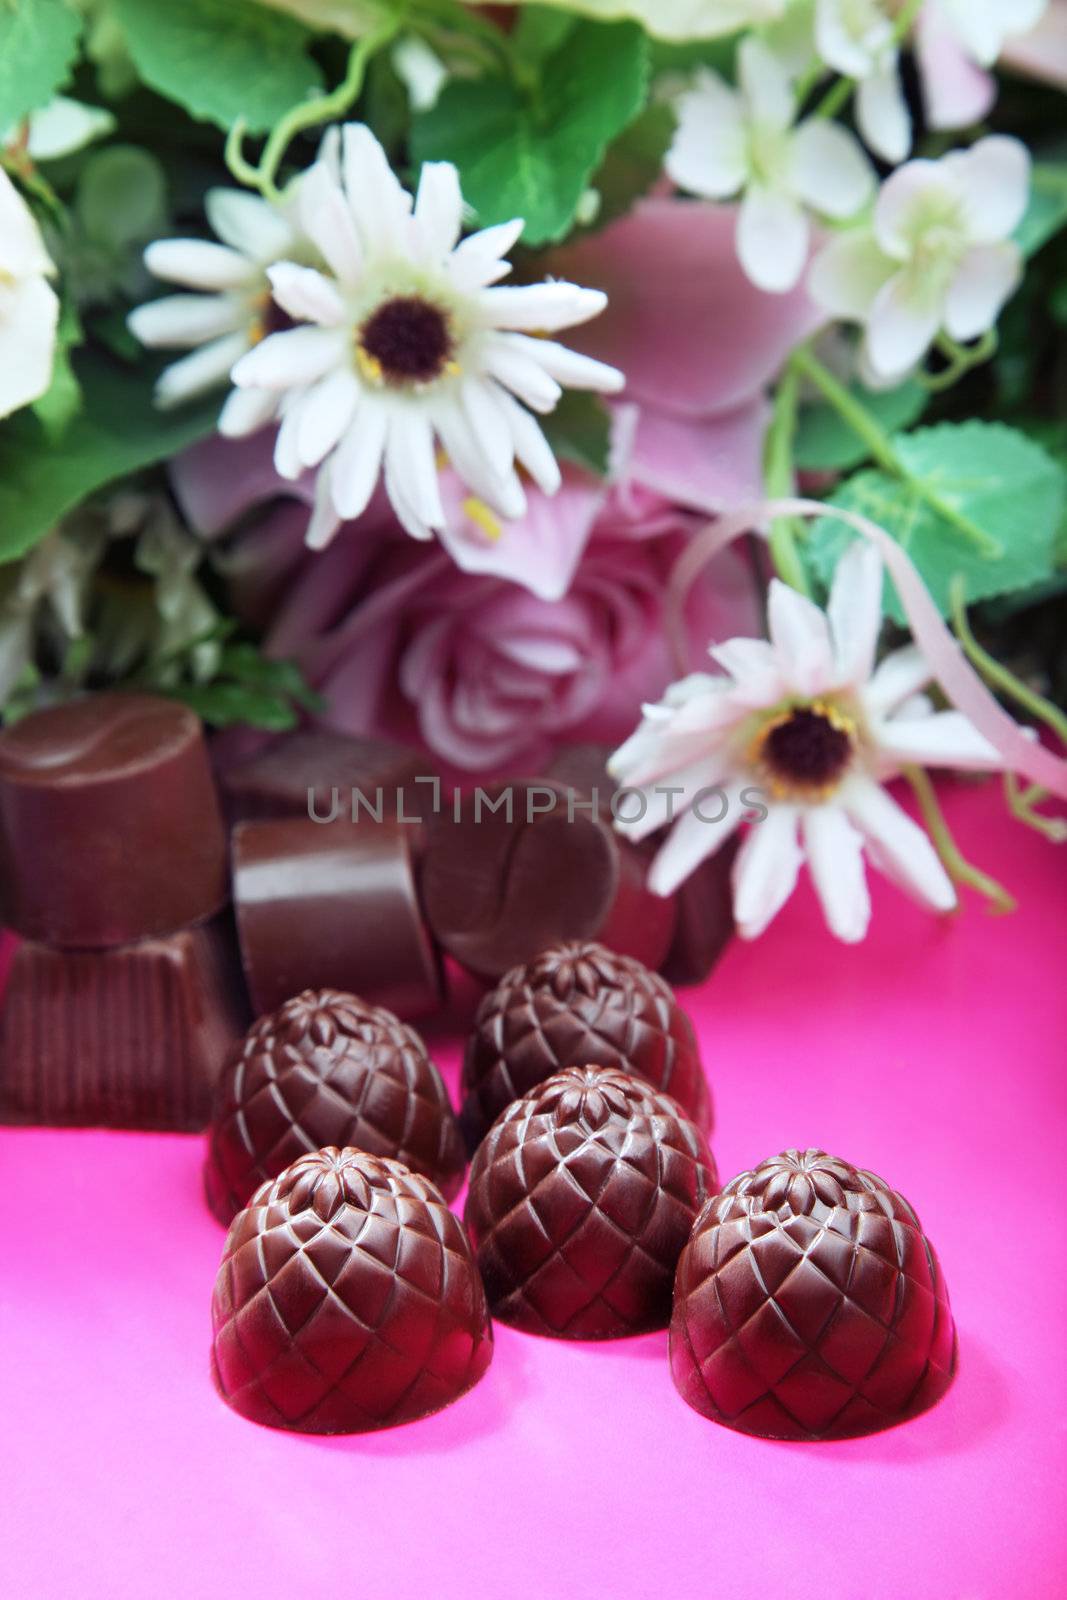 Chocolate sweets and flowers by Novic